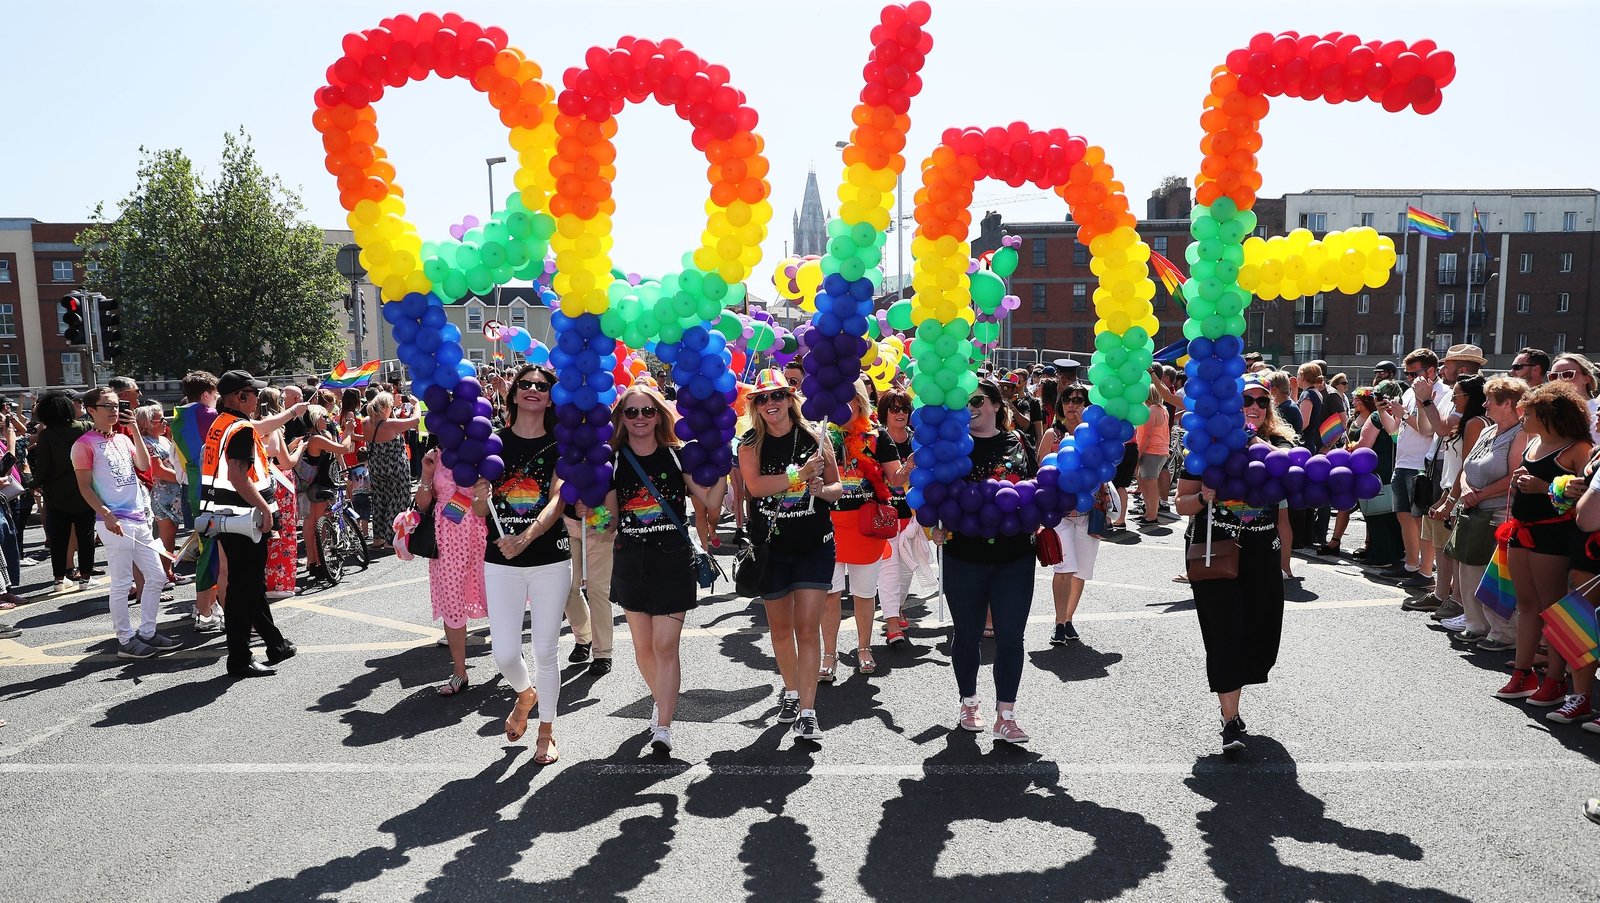 Thousands gather to celebrate Pride parade in Dublin